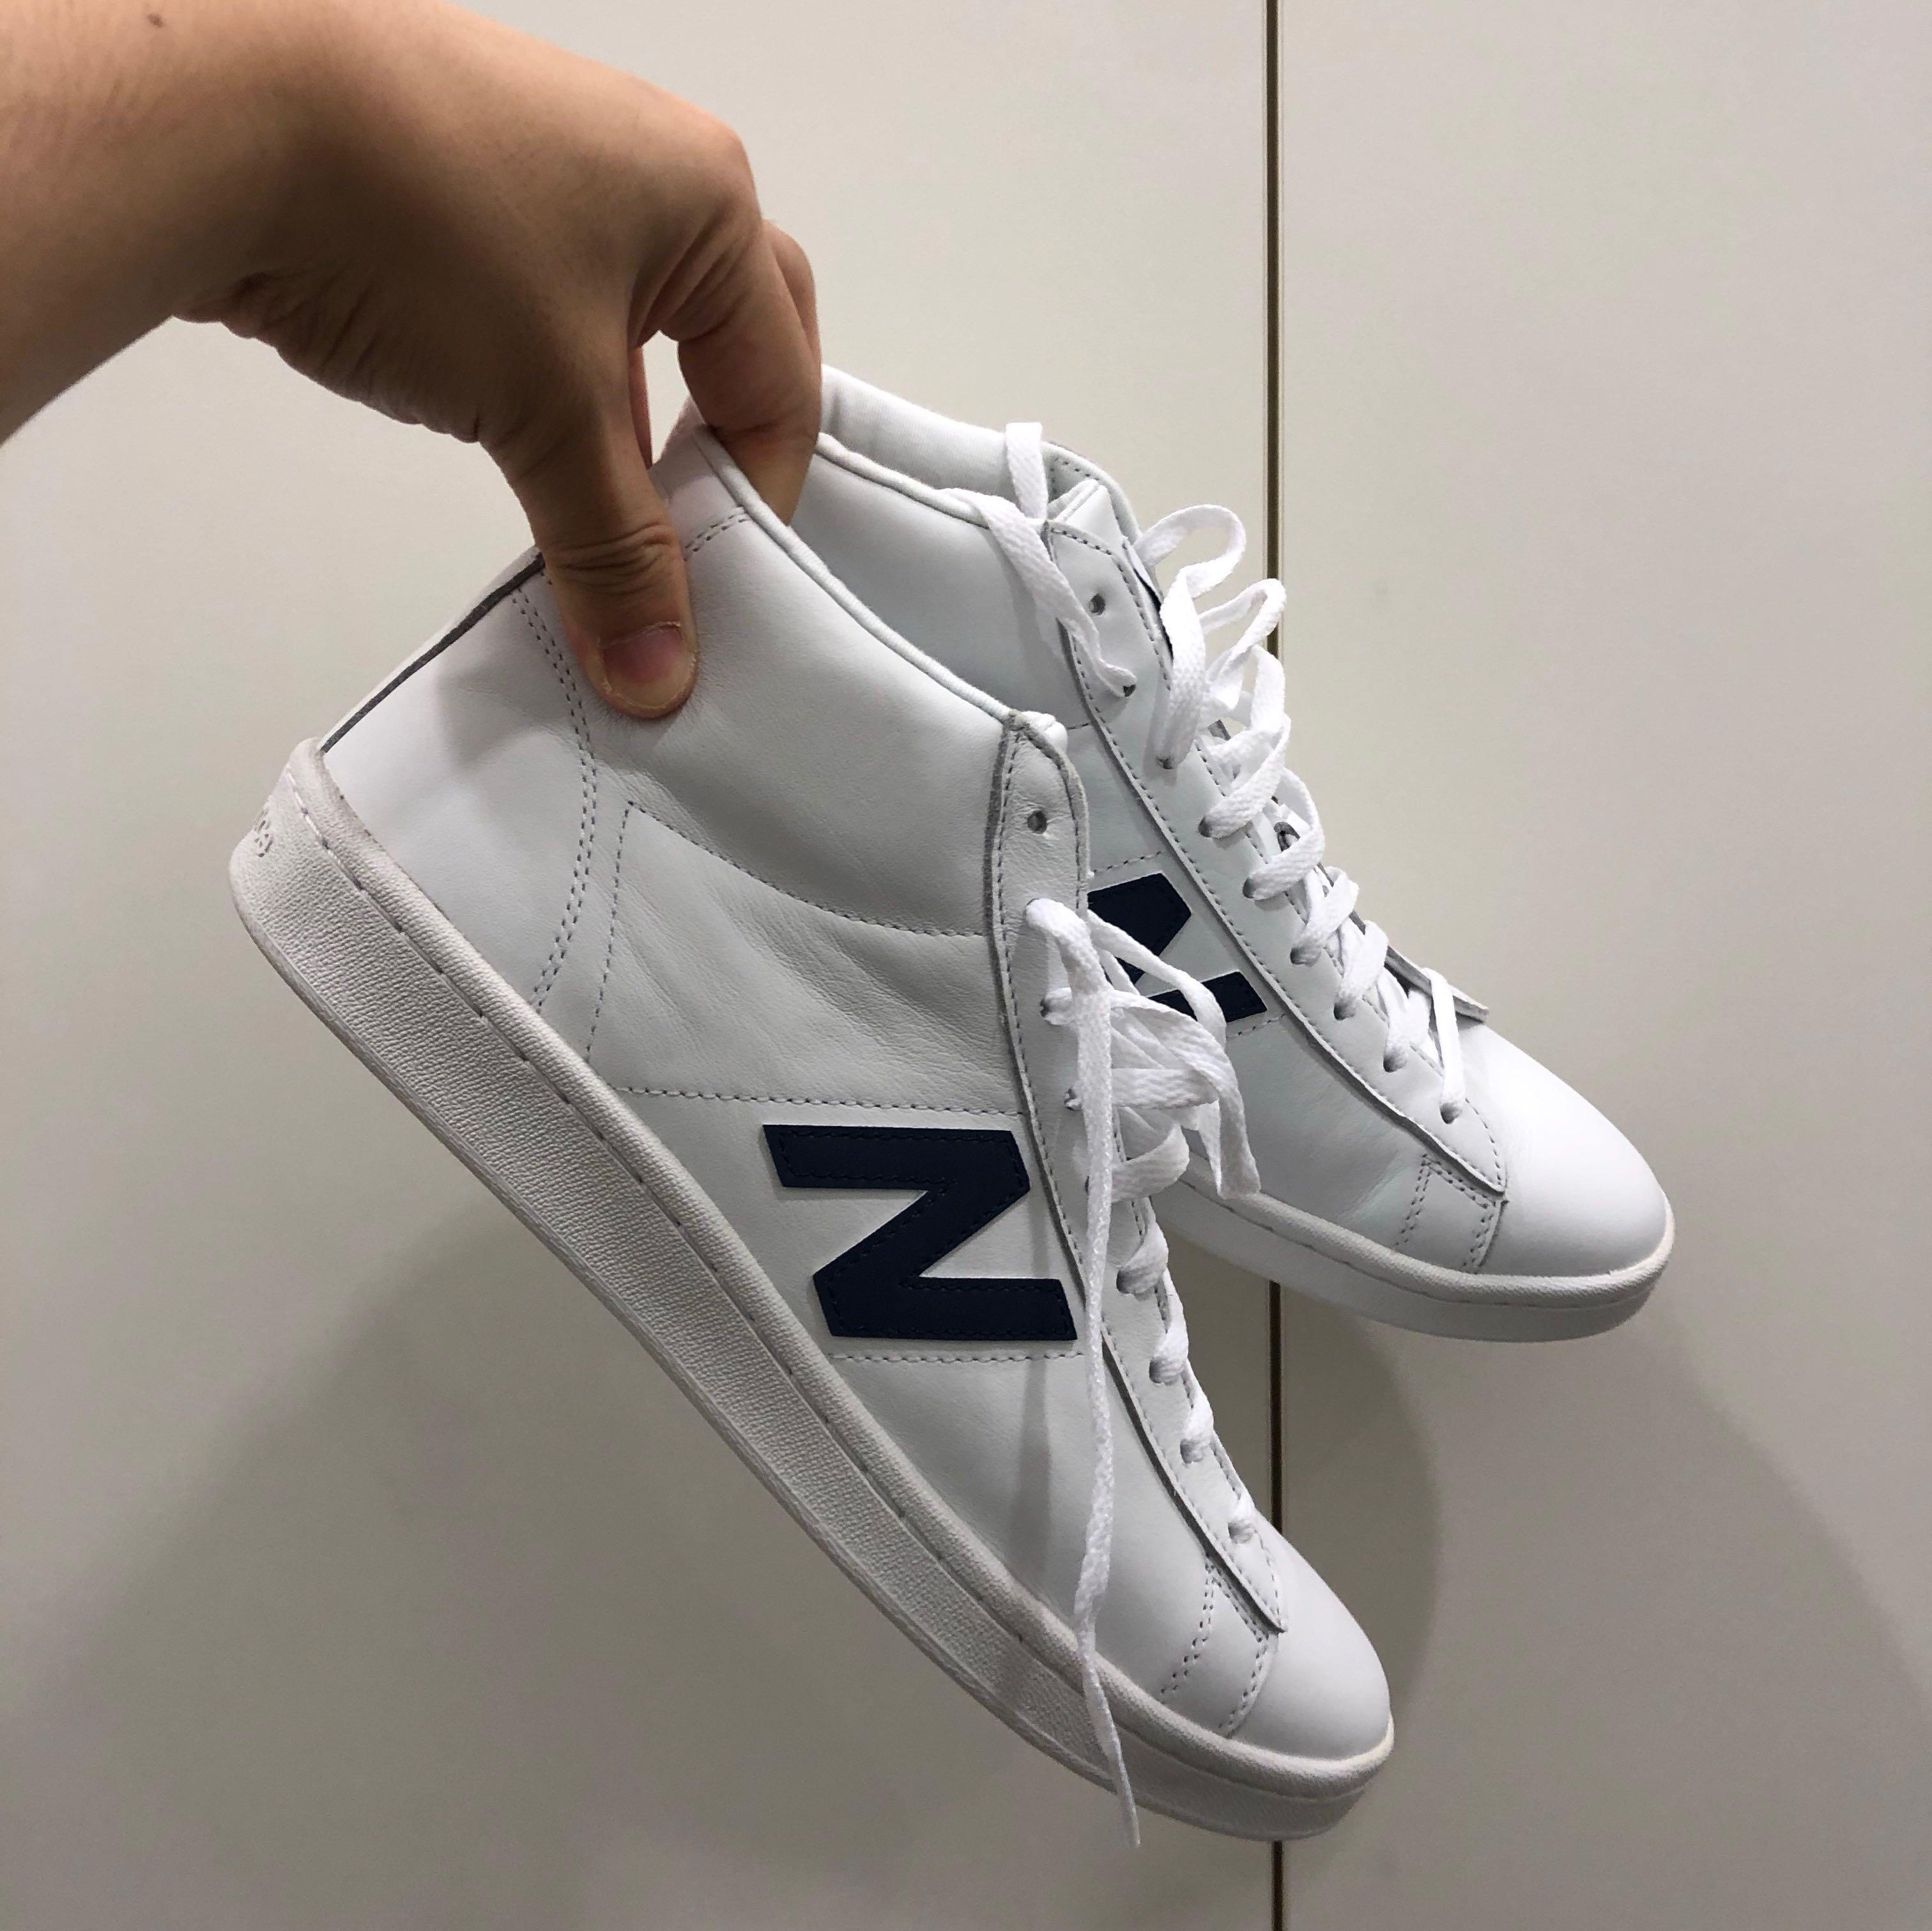 new balance 891 high top sneakers